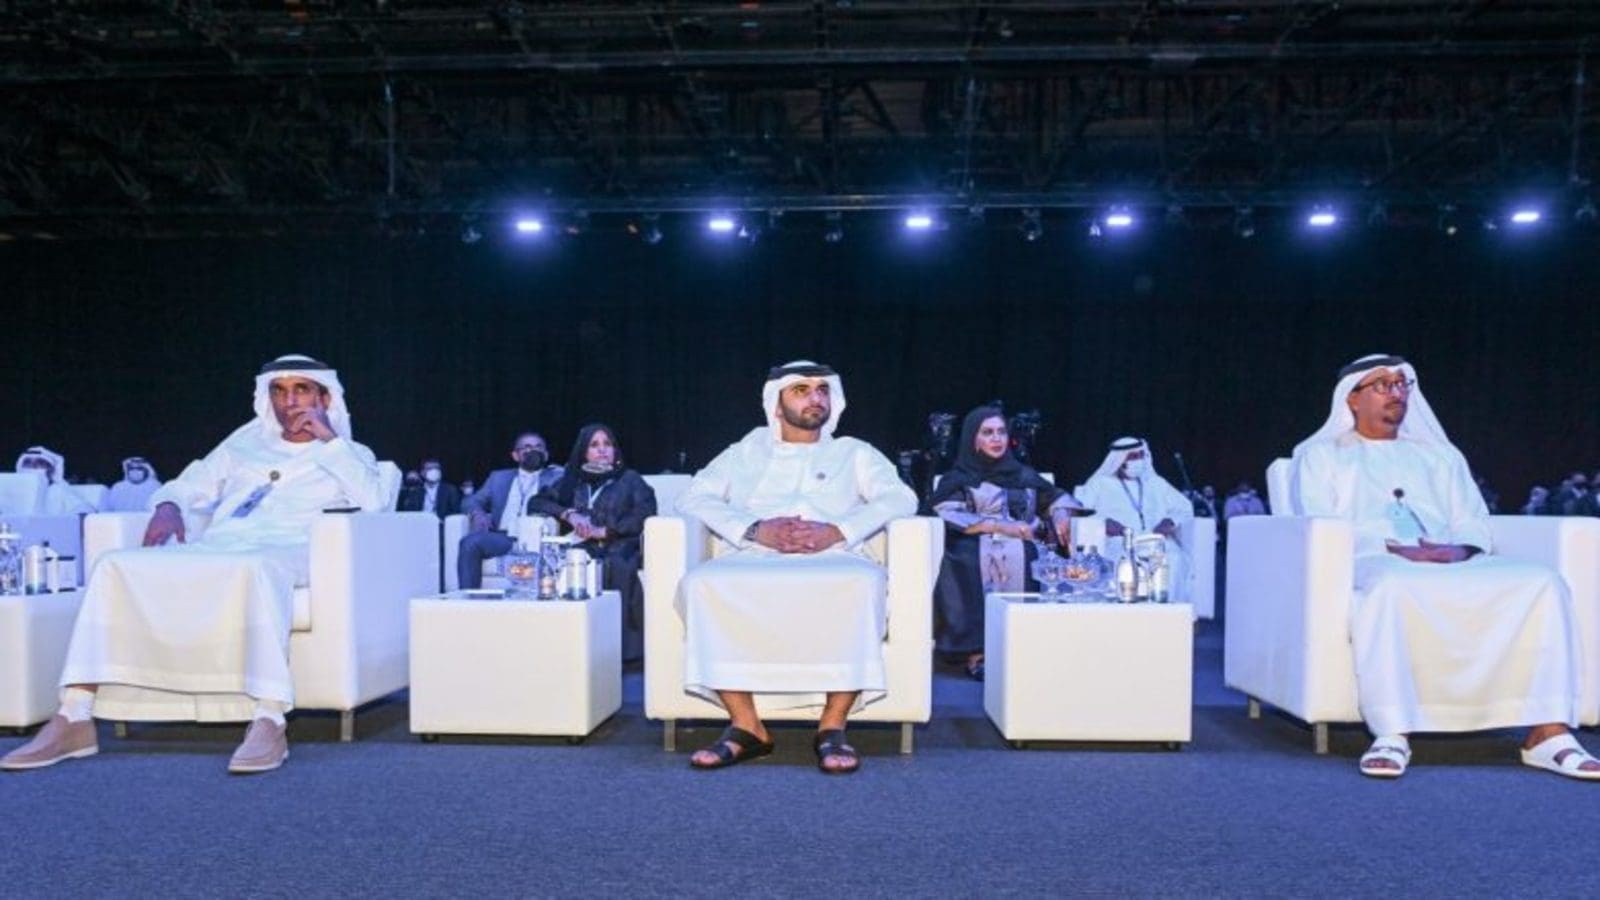 Dubai introduces “Dubai Star” to promote sustainable food safety solutions among restaurants